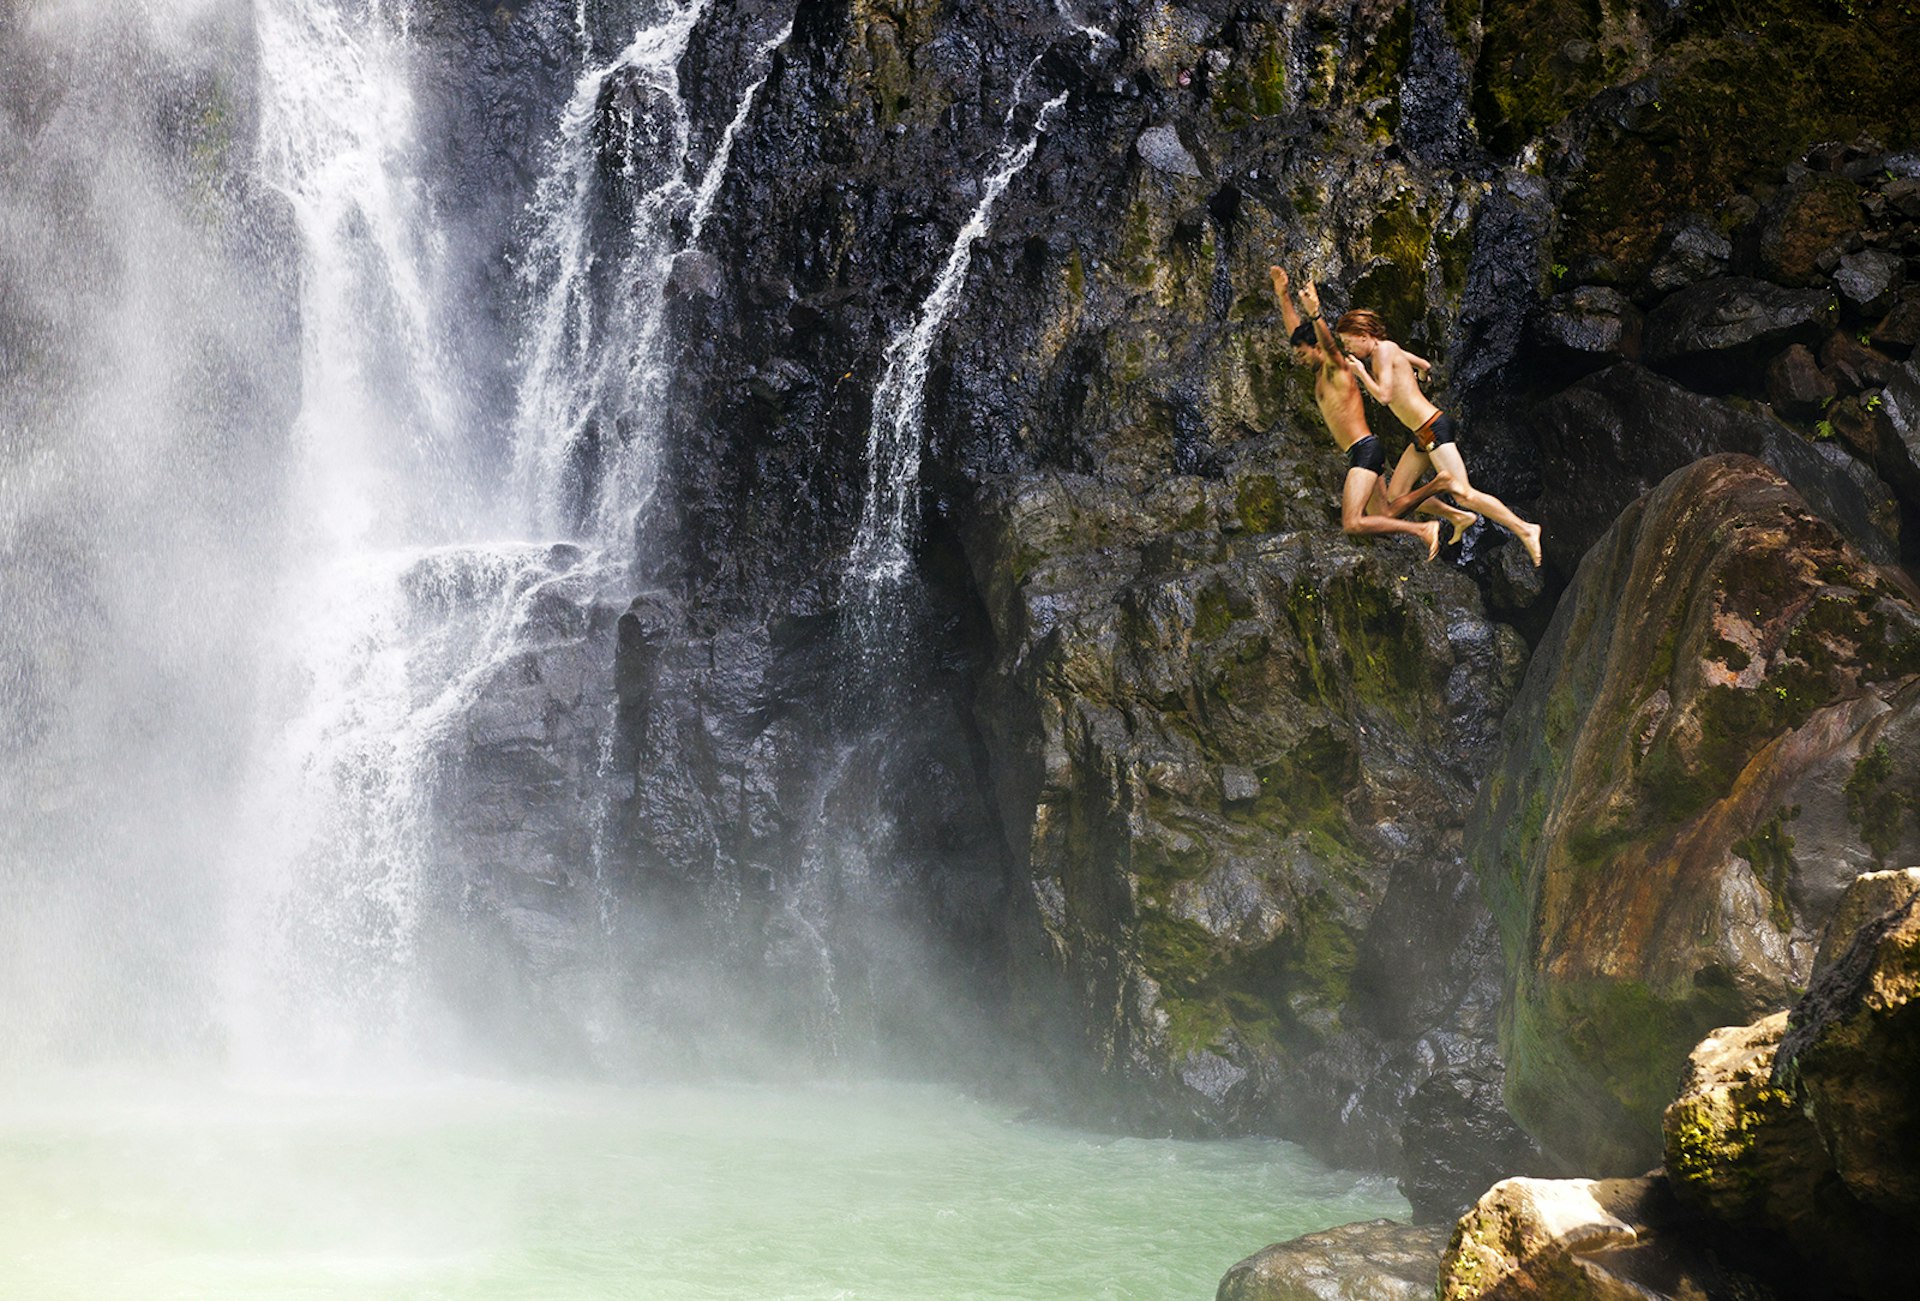 Two people jump into the pool at the foot of Victoria Falls © Nick Ledger / Getty Images